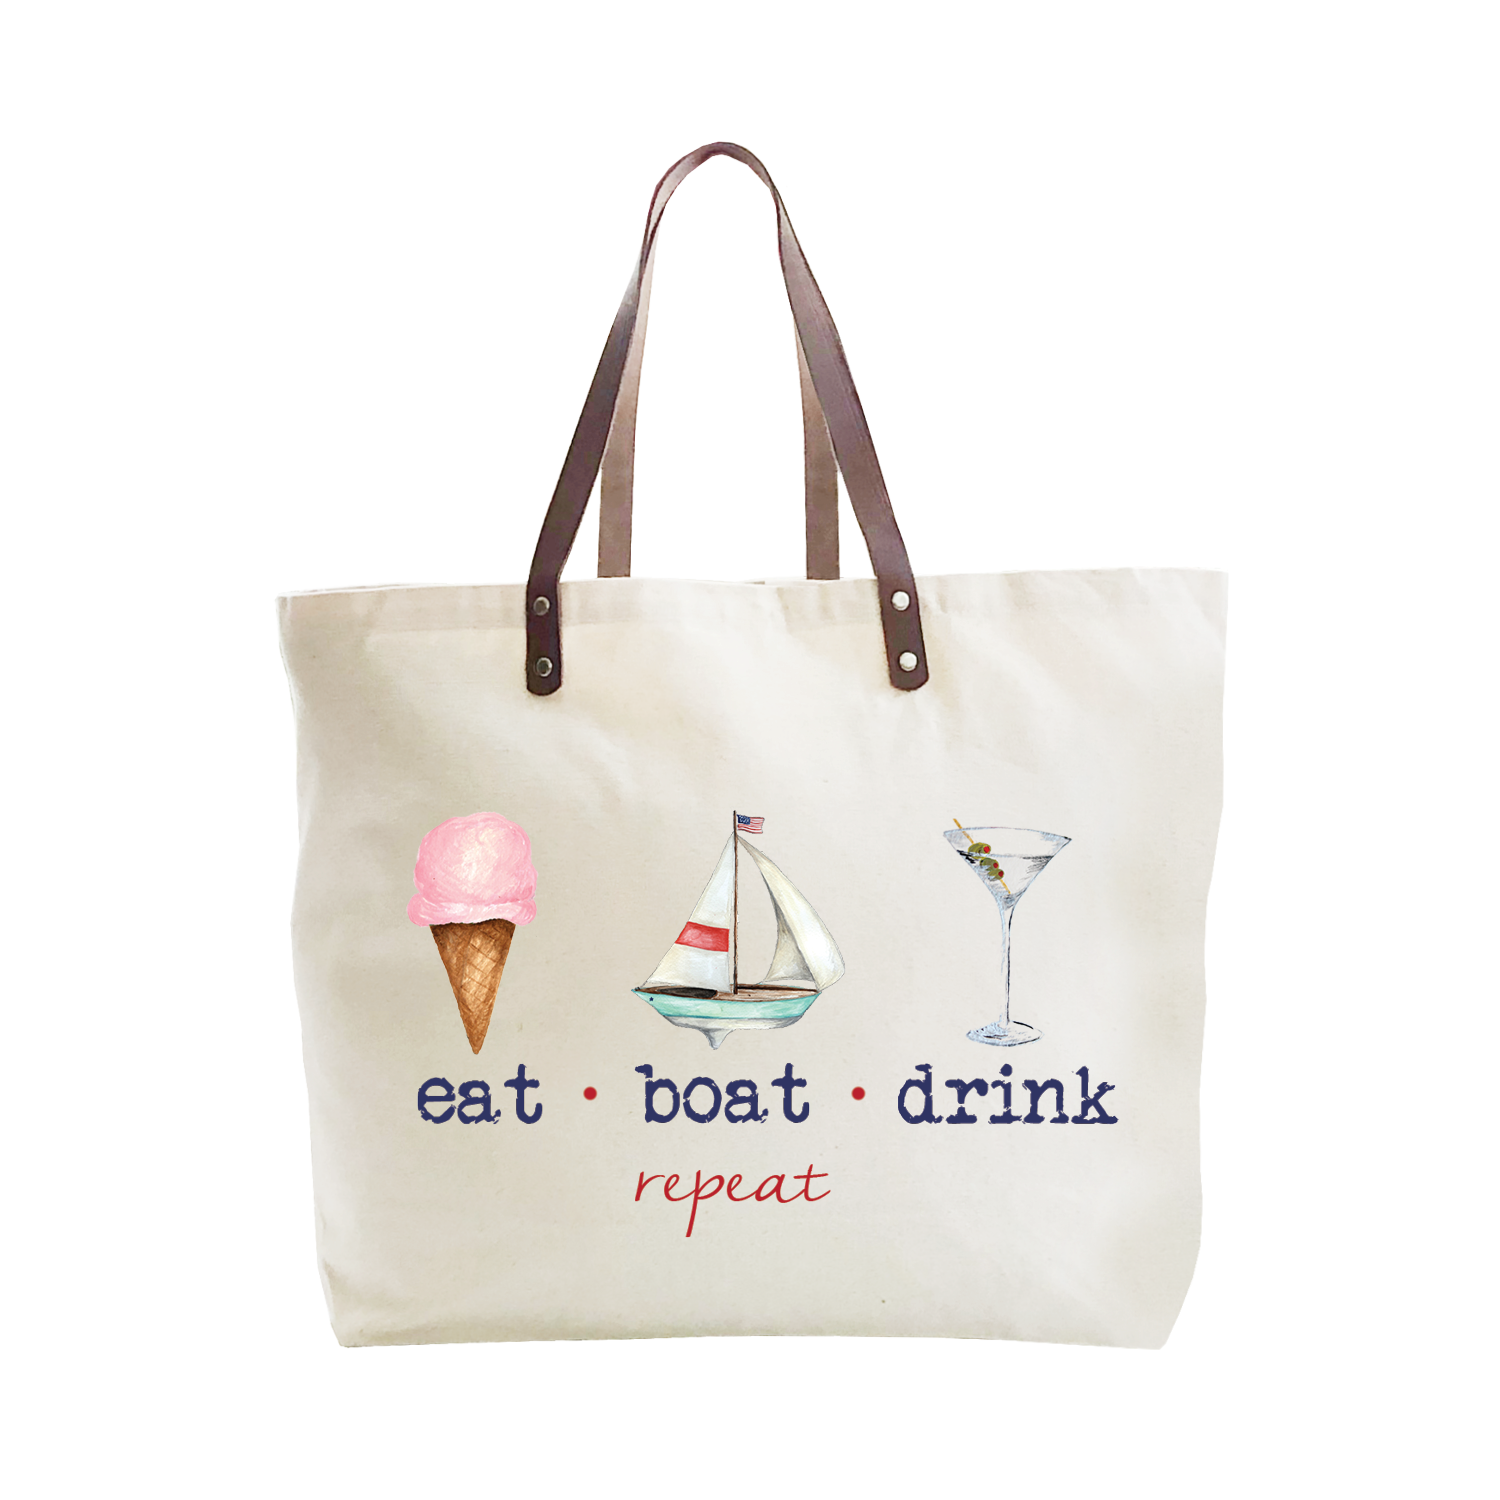 eat boat drink repeat large tote